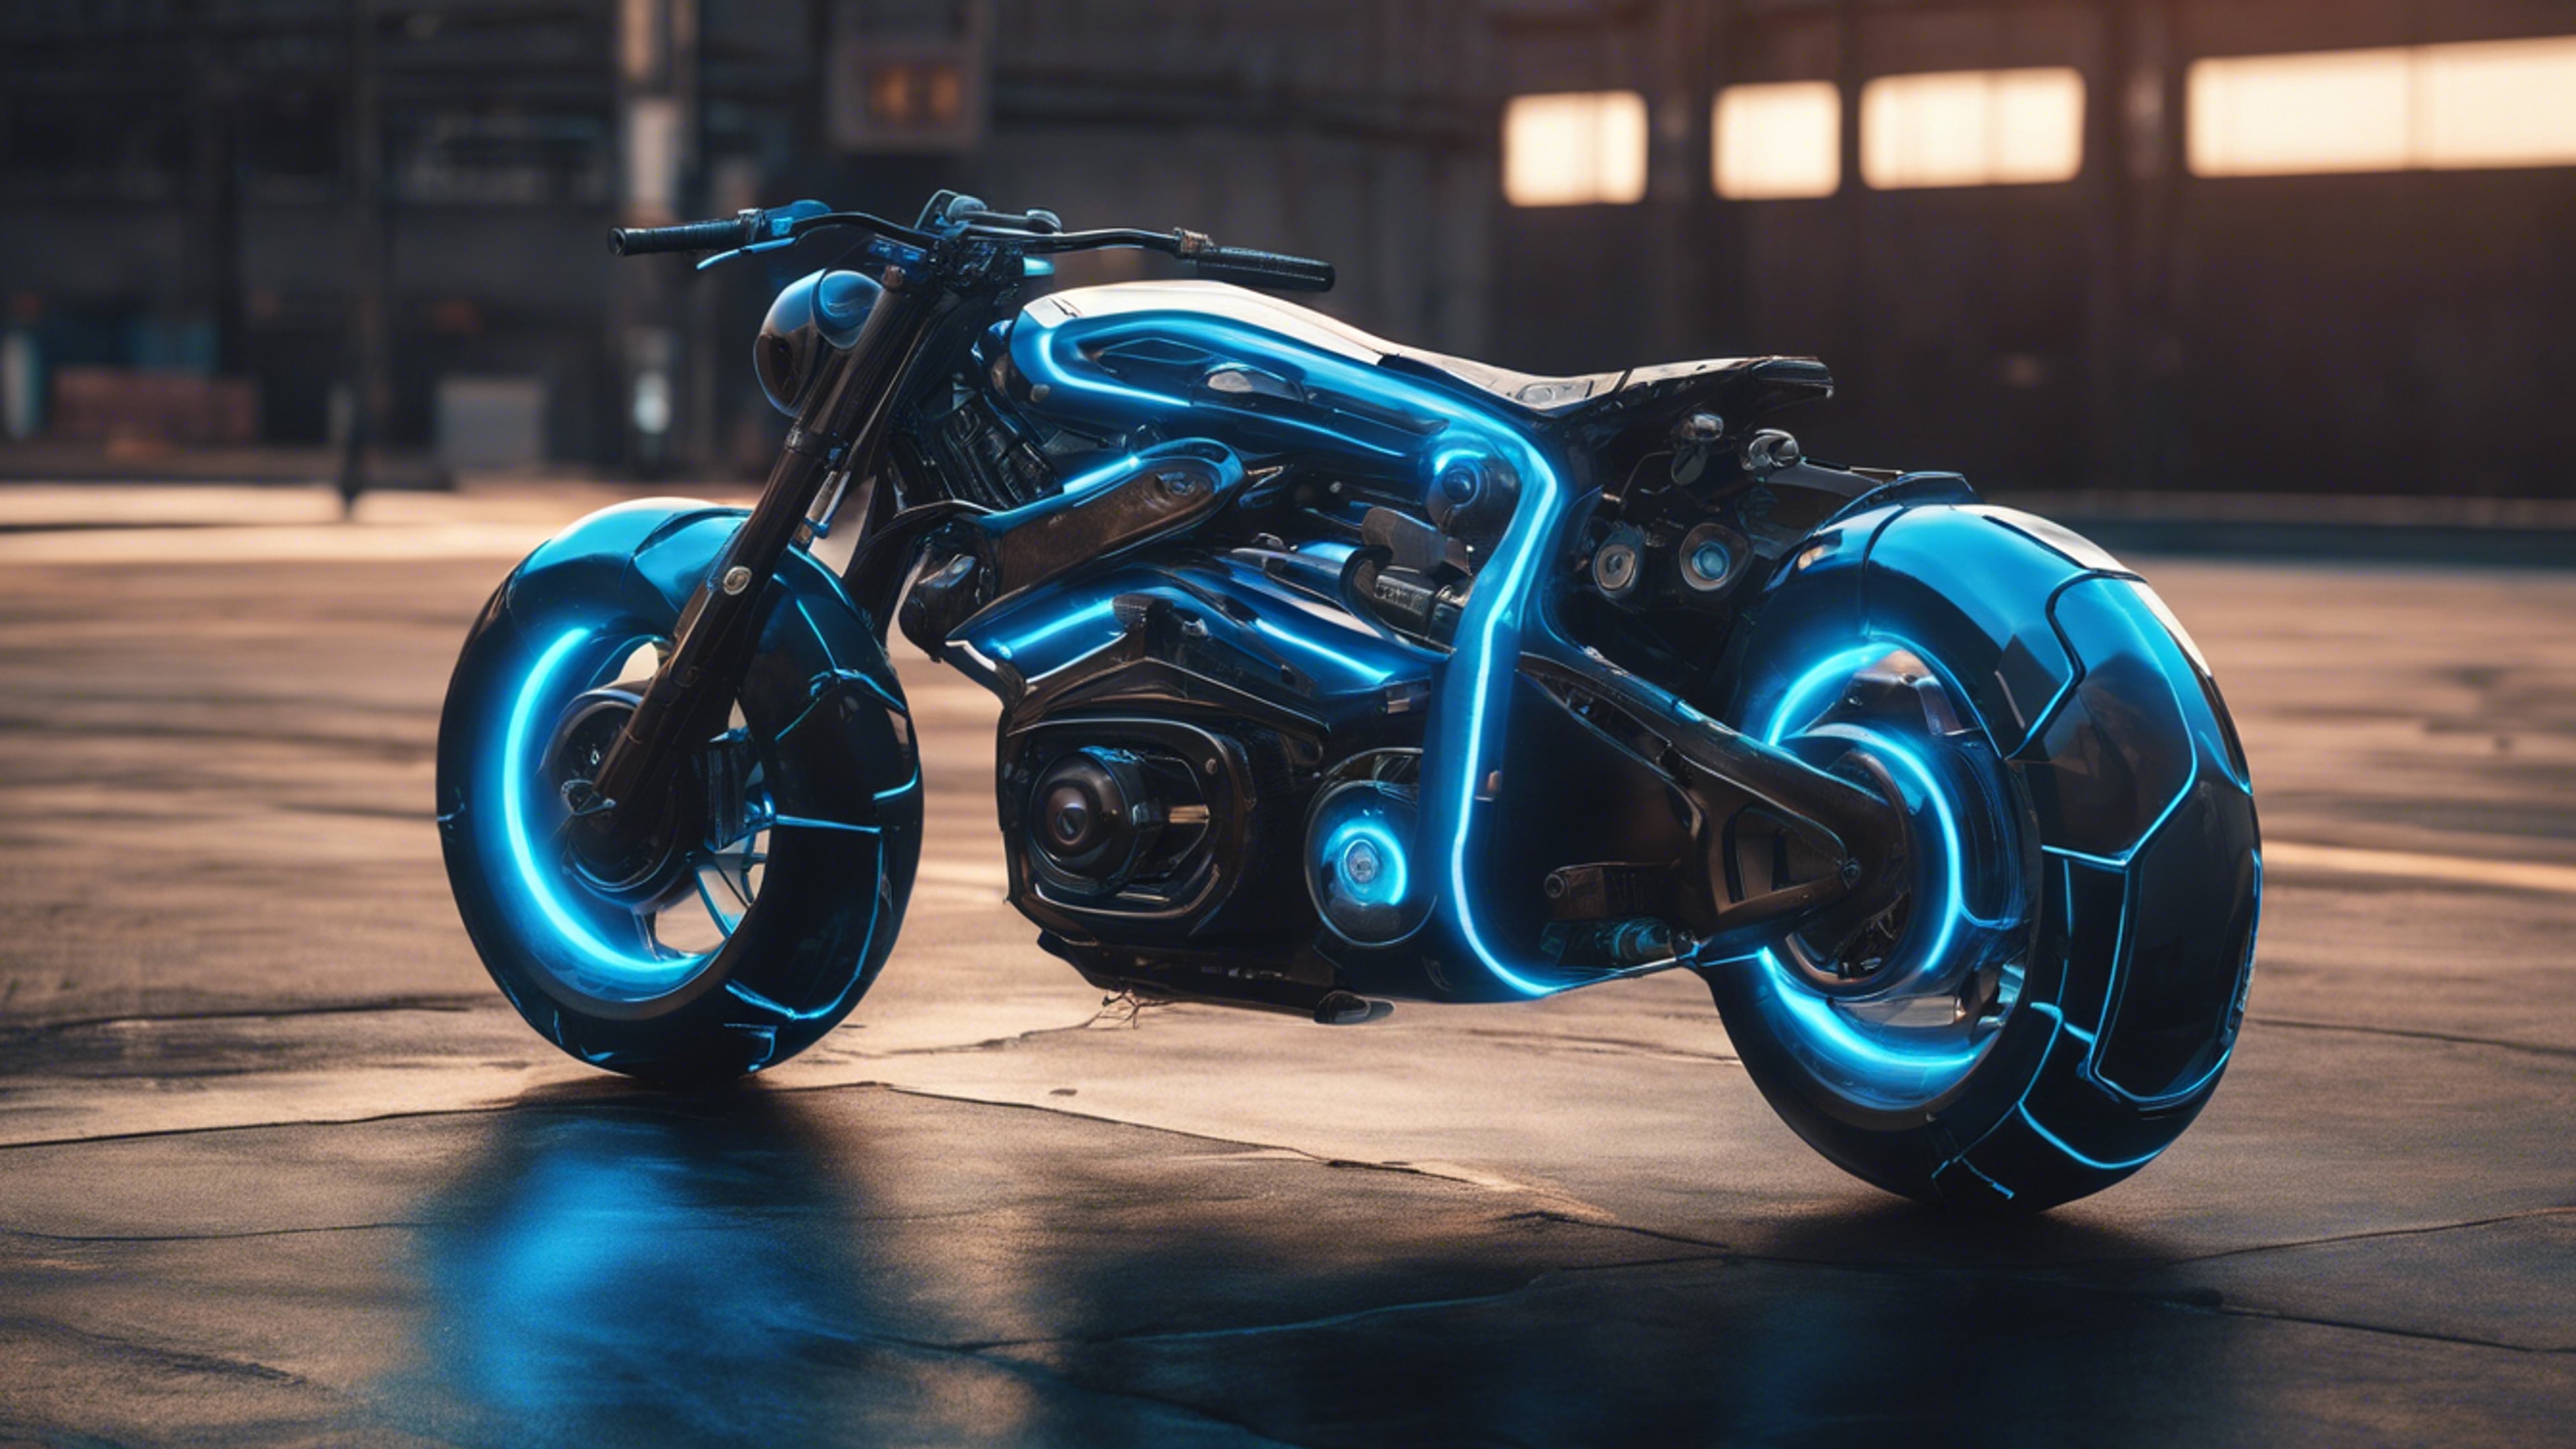 A concept art of a cool futuristic motorcycle, designed in neon black and blue colors. Tapeta[616cf7a0093641f39ad2]